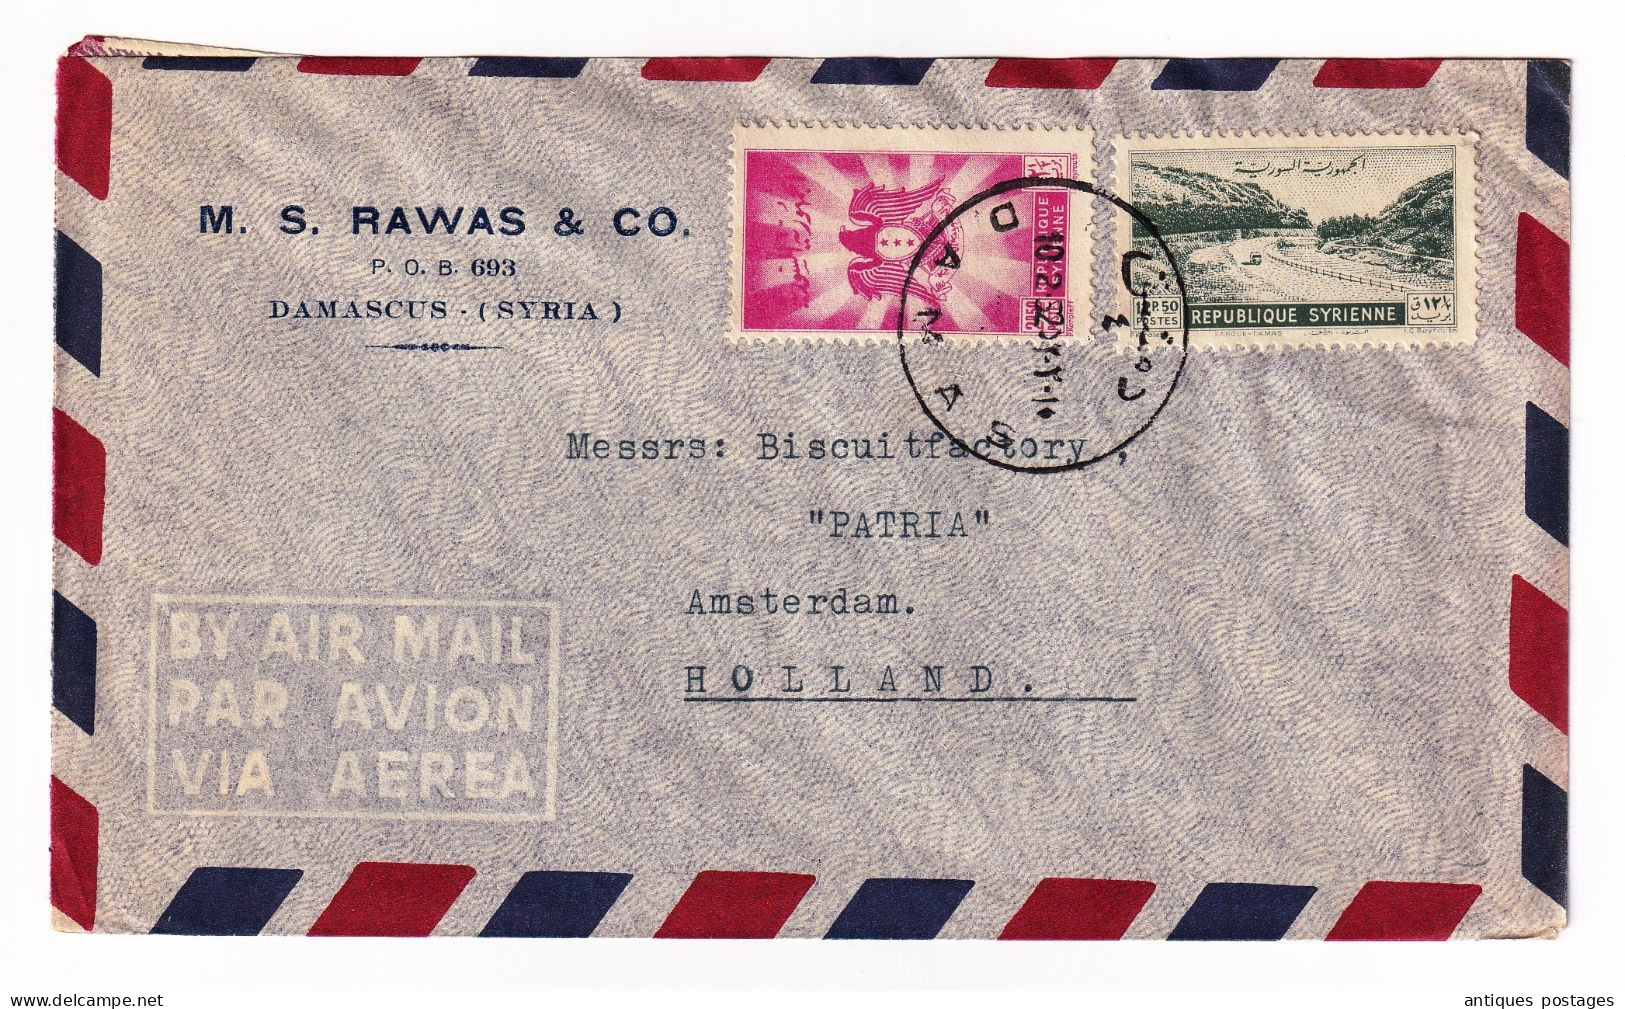 Lettre Damas Damascus Syrie Syria Amsterdam Holland M.S. RAWAS & CO Biscuitfactory Patria 1952 - Syrië